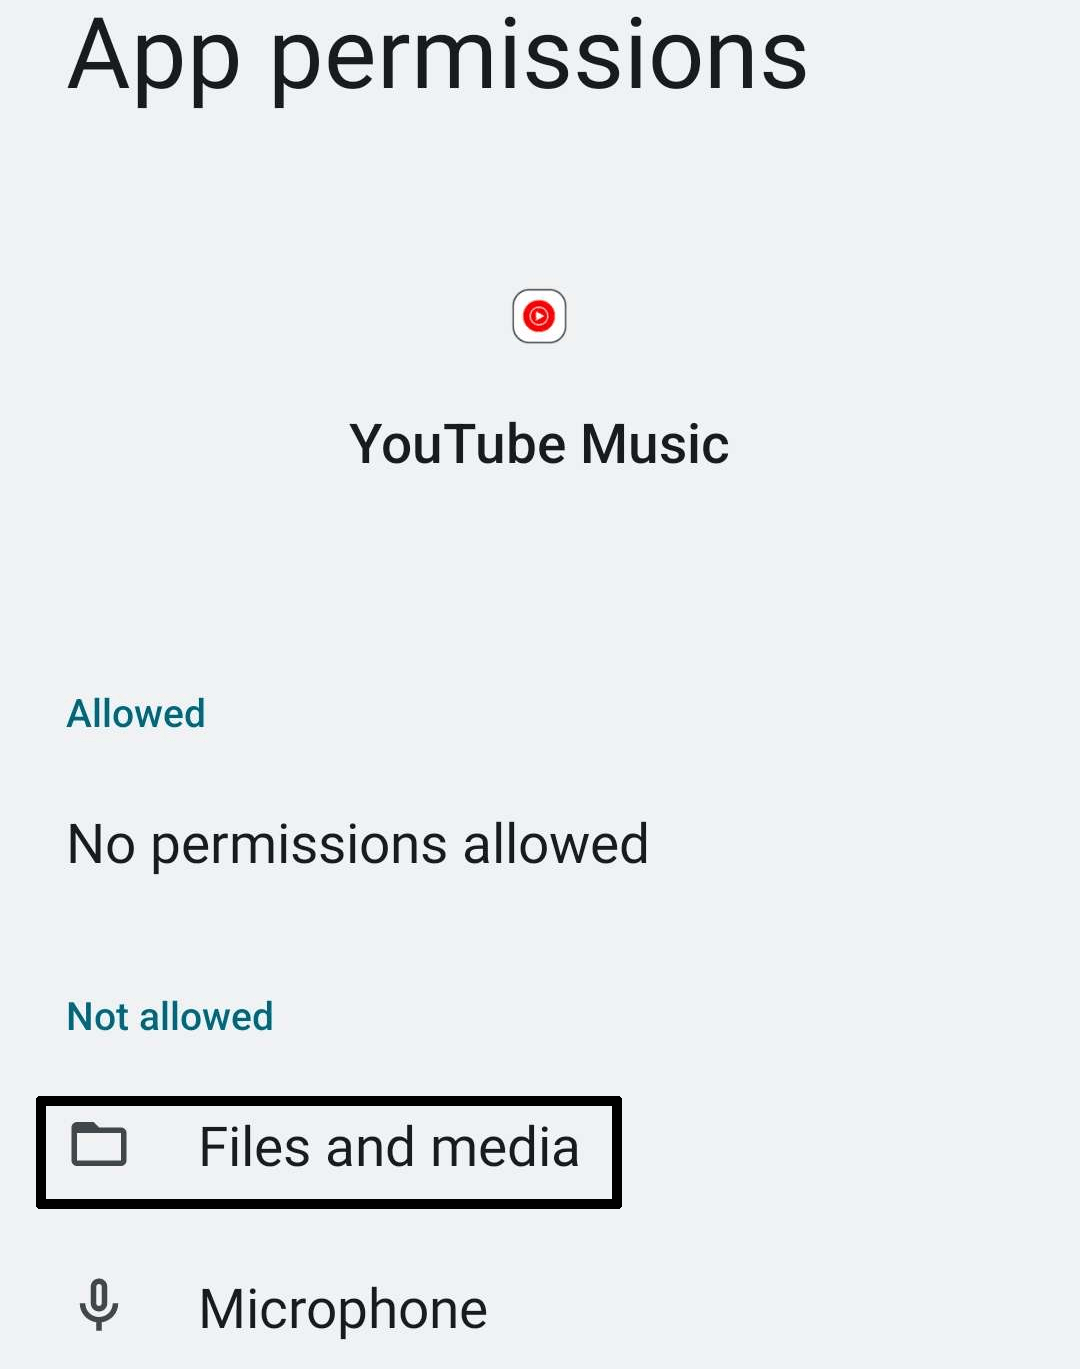 allow YouTube Music app permission to Files and Media on Android through system settings